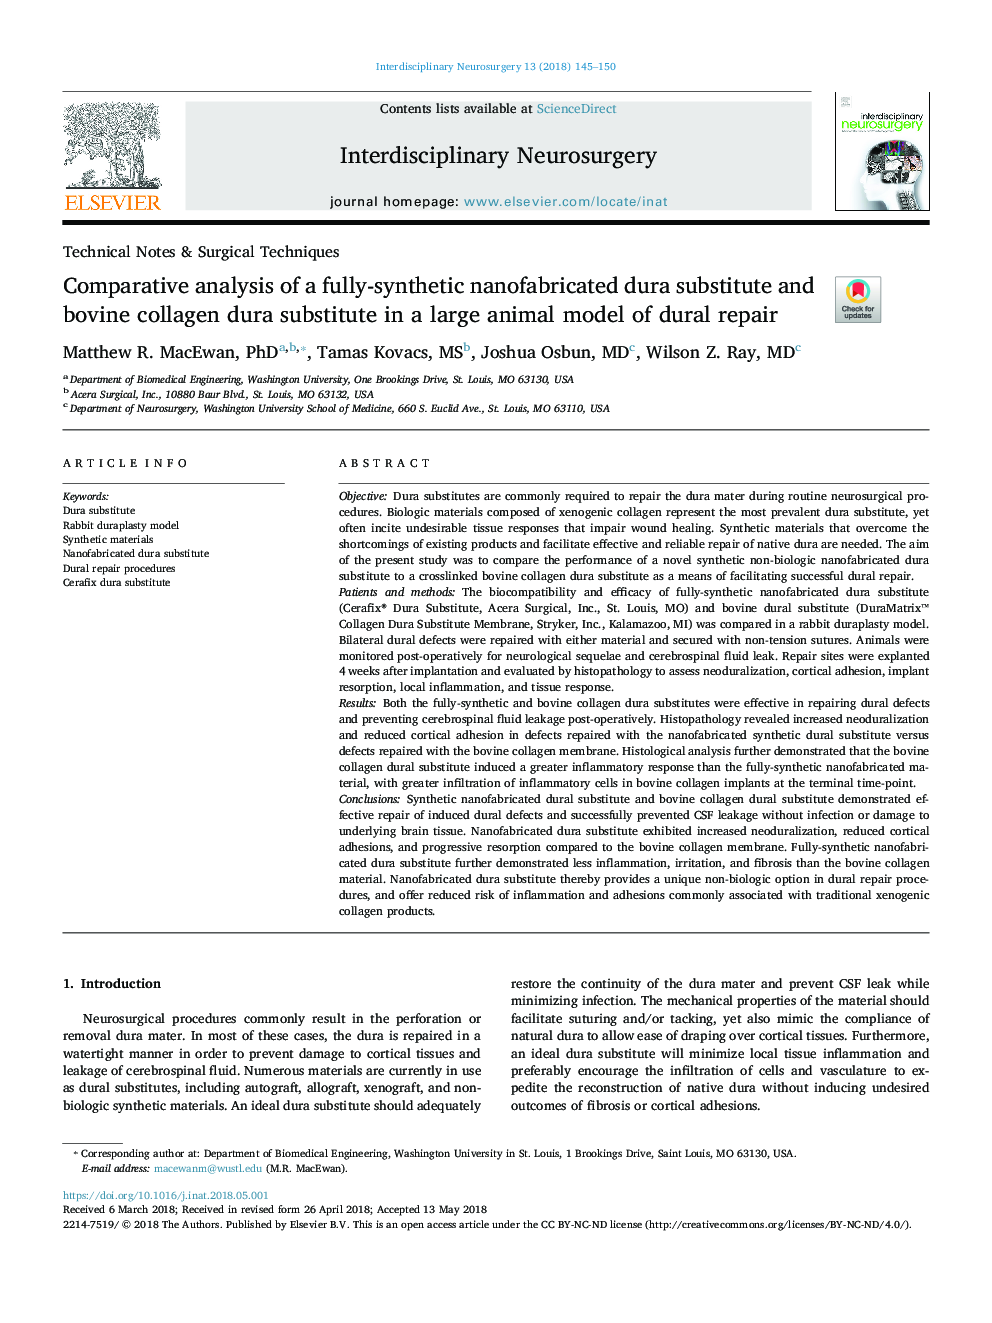 Comparative analysis of a fully-synthetic nanofabricated dura substitute and bovine collagen dura substitute in a large animal model of dural repair